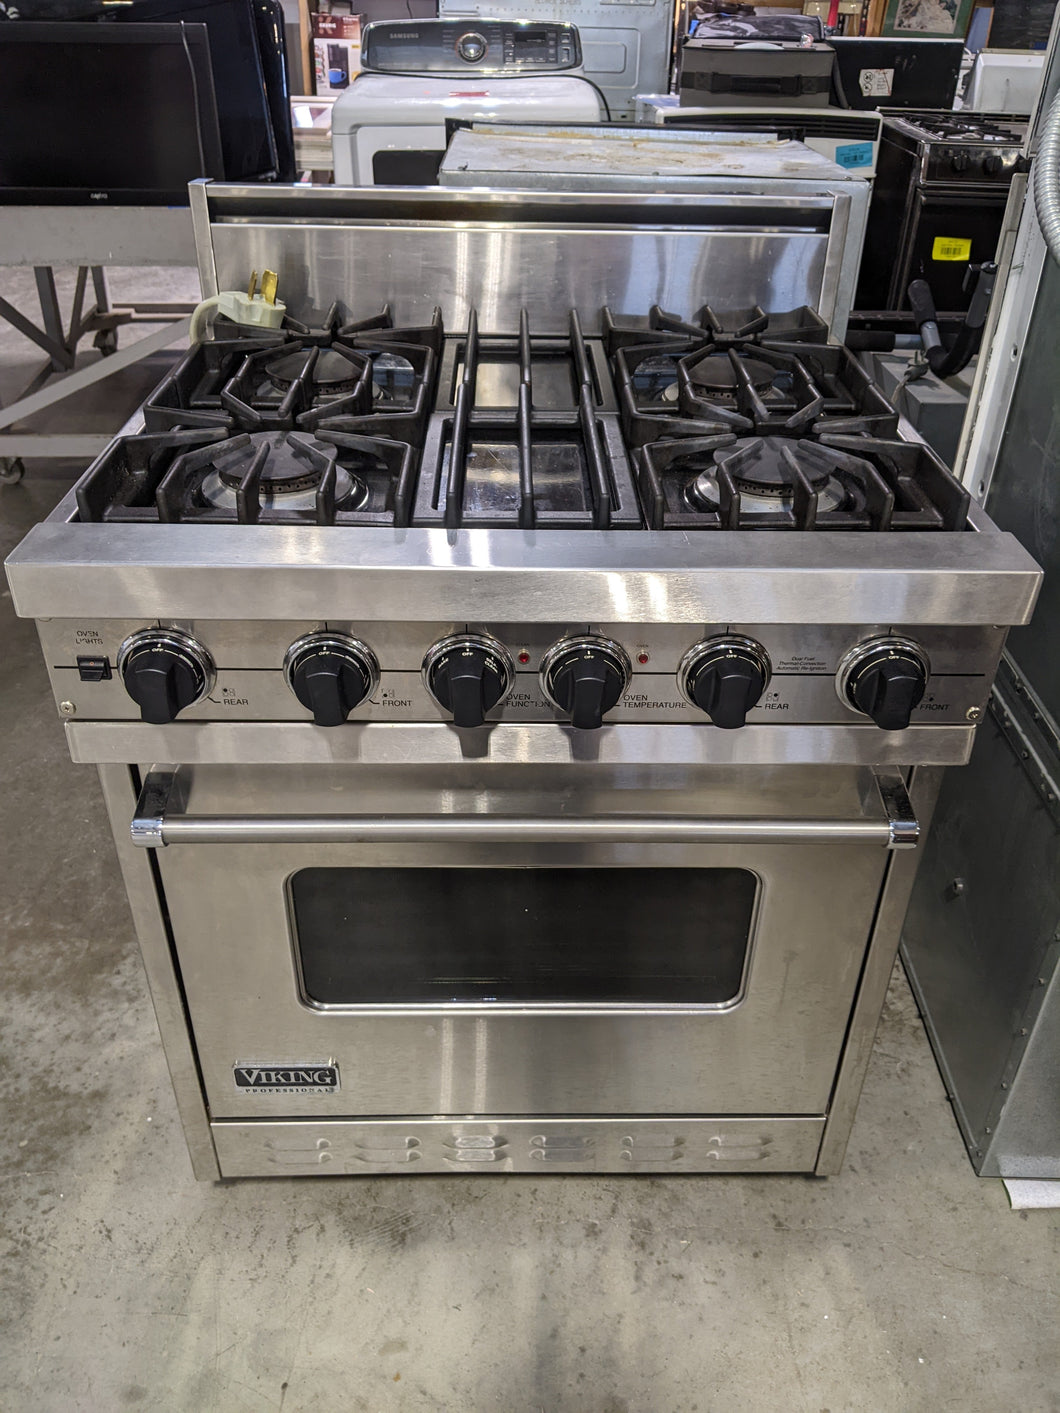 Viking VDR74826GSS 7 Series 48 Inch Stainless Steel Dual Fuel